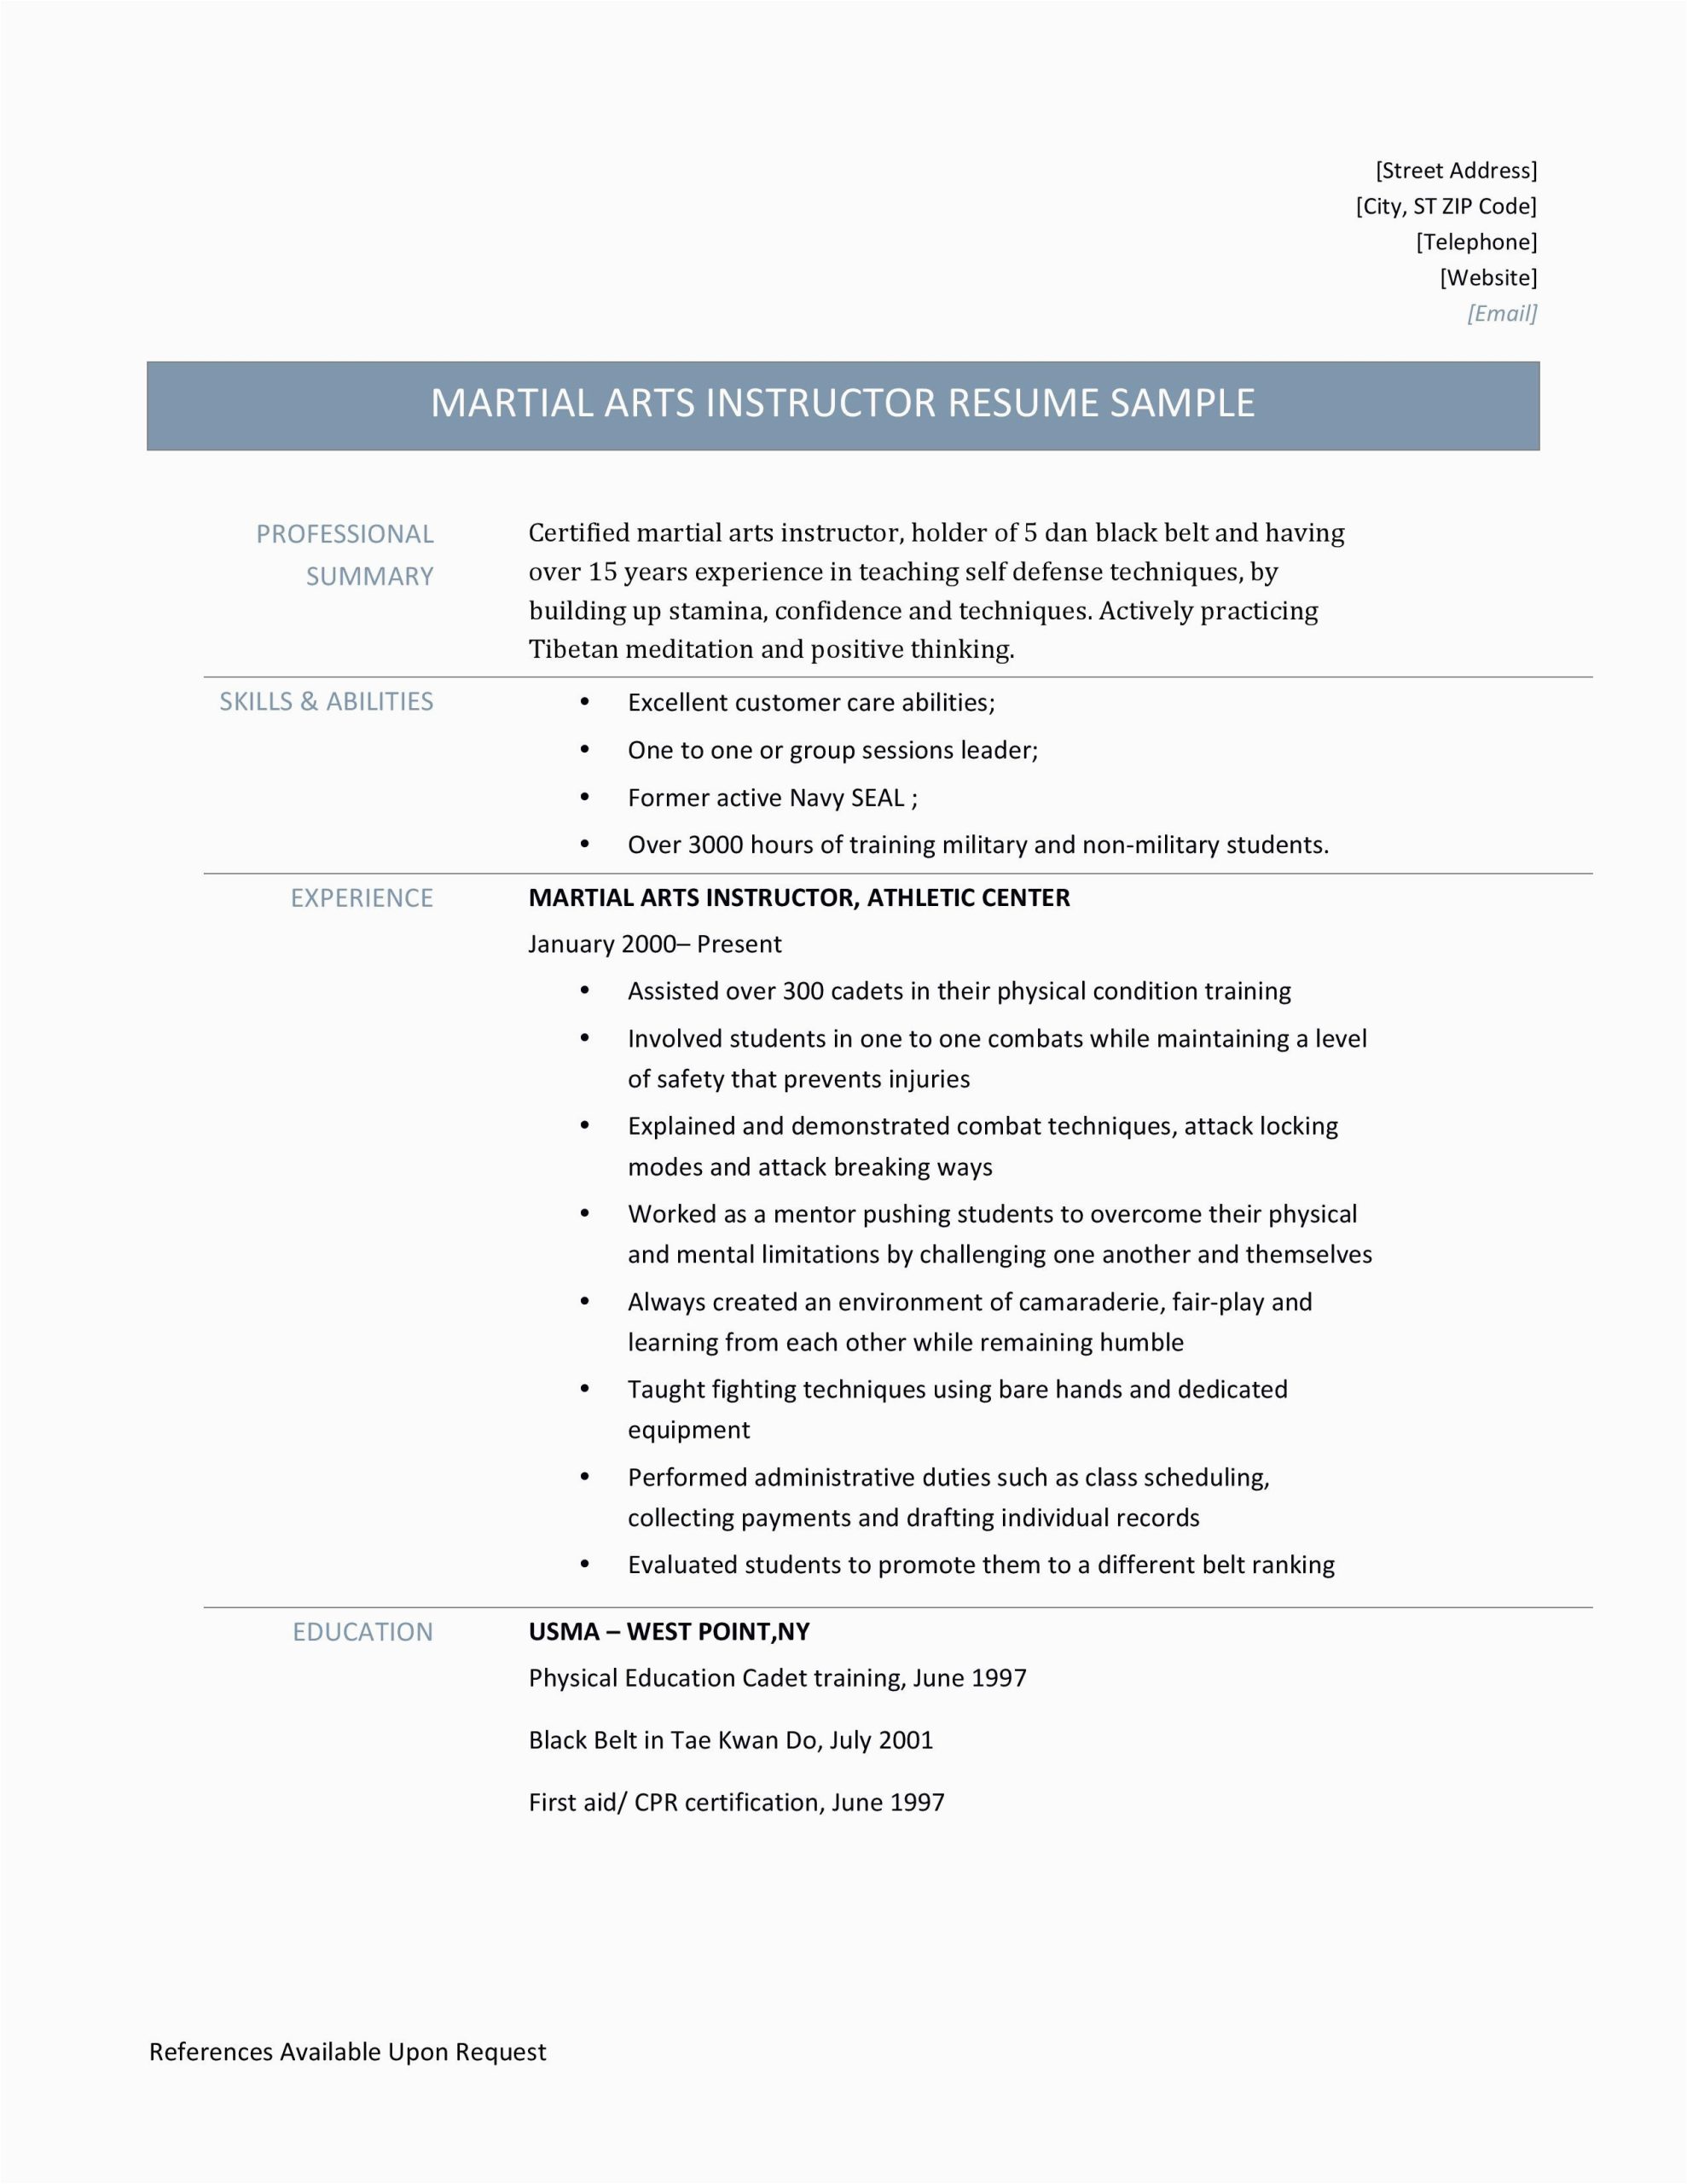 Free Resume Samples for Martial Arts Martial Arts Instructor Resume Template and Job Description